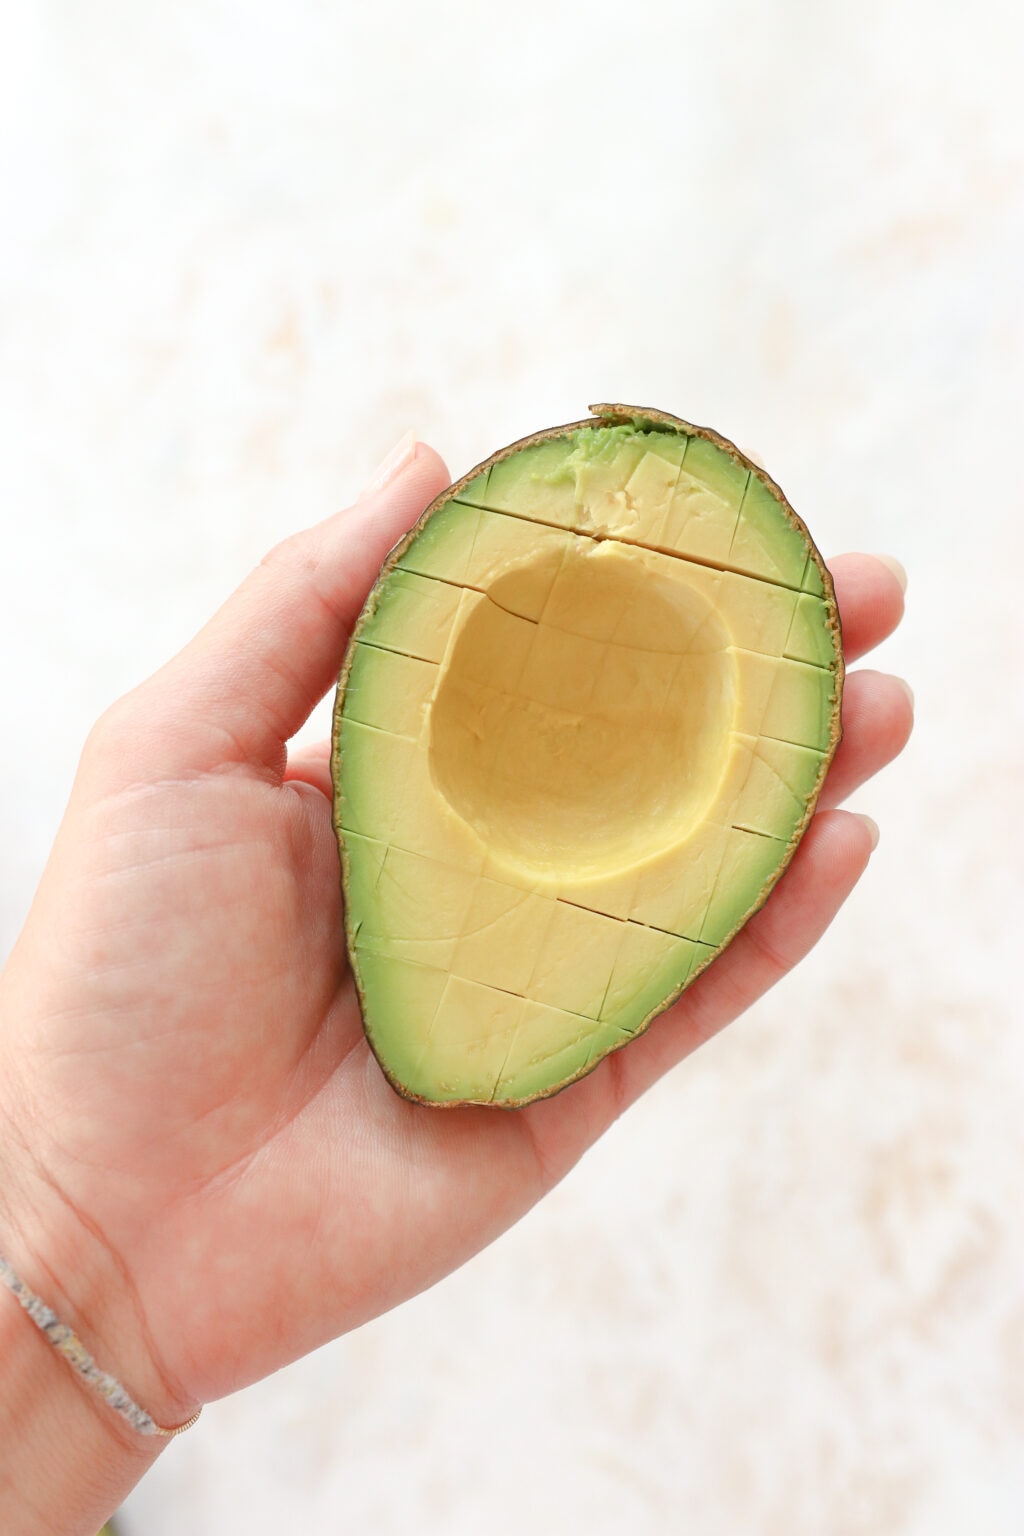 A hand is holding half an avocado. The avocado half has its skin on and has been sliced into 1/2 inch cubes.